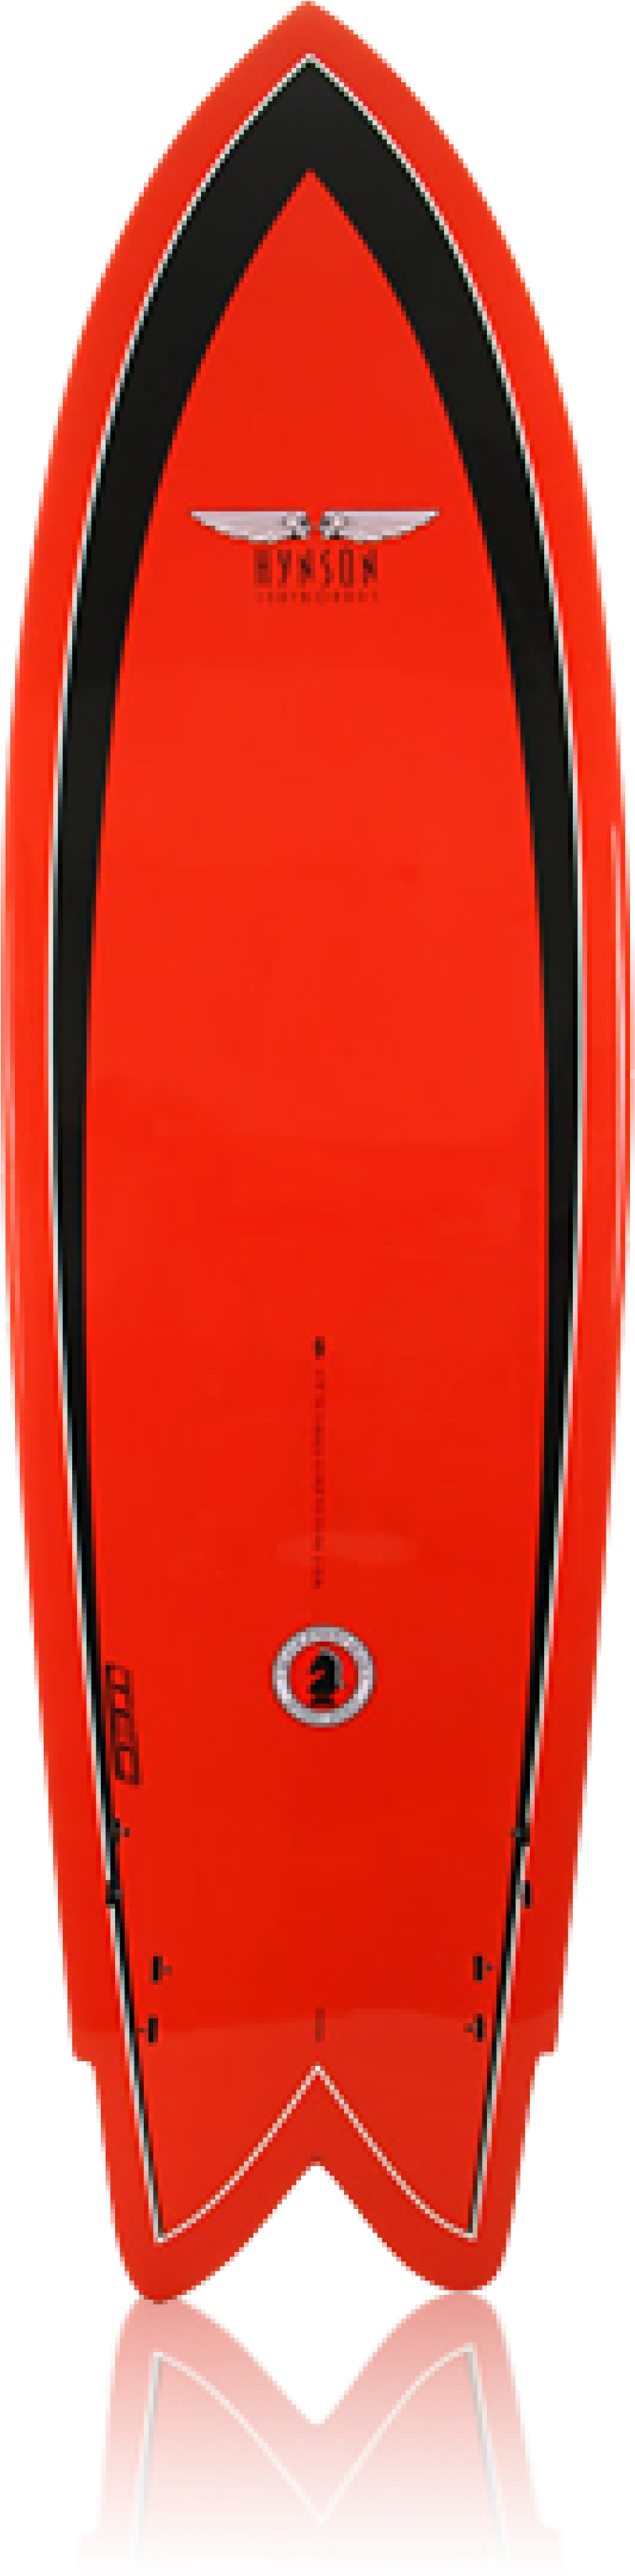 Red Surfboard Standing Vertical PNG